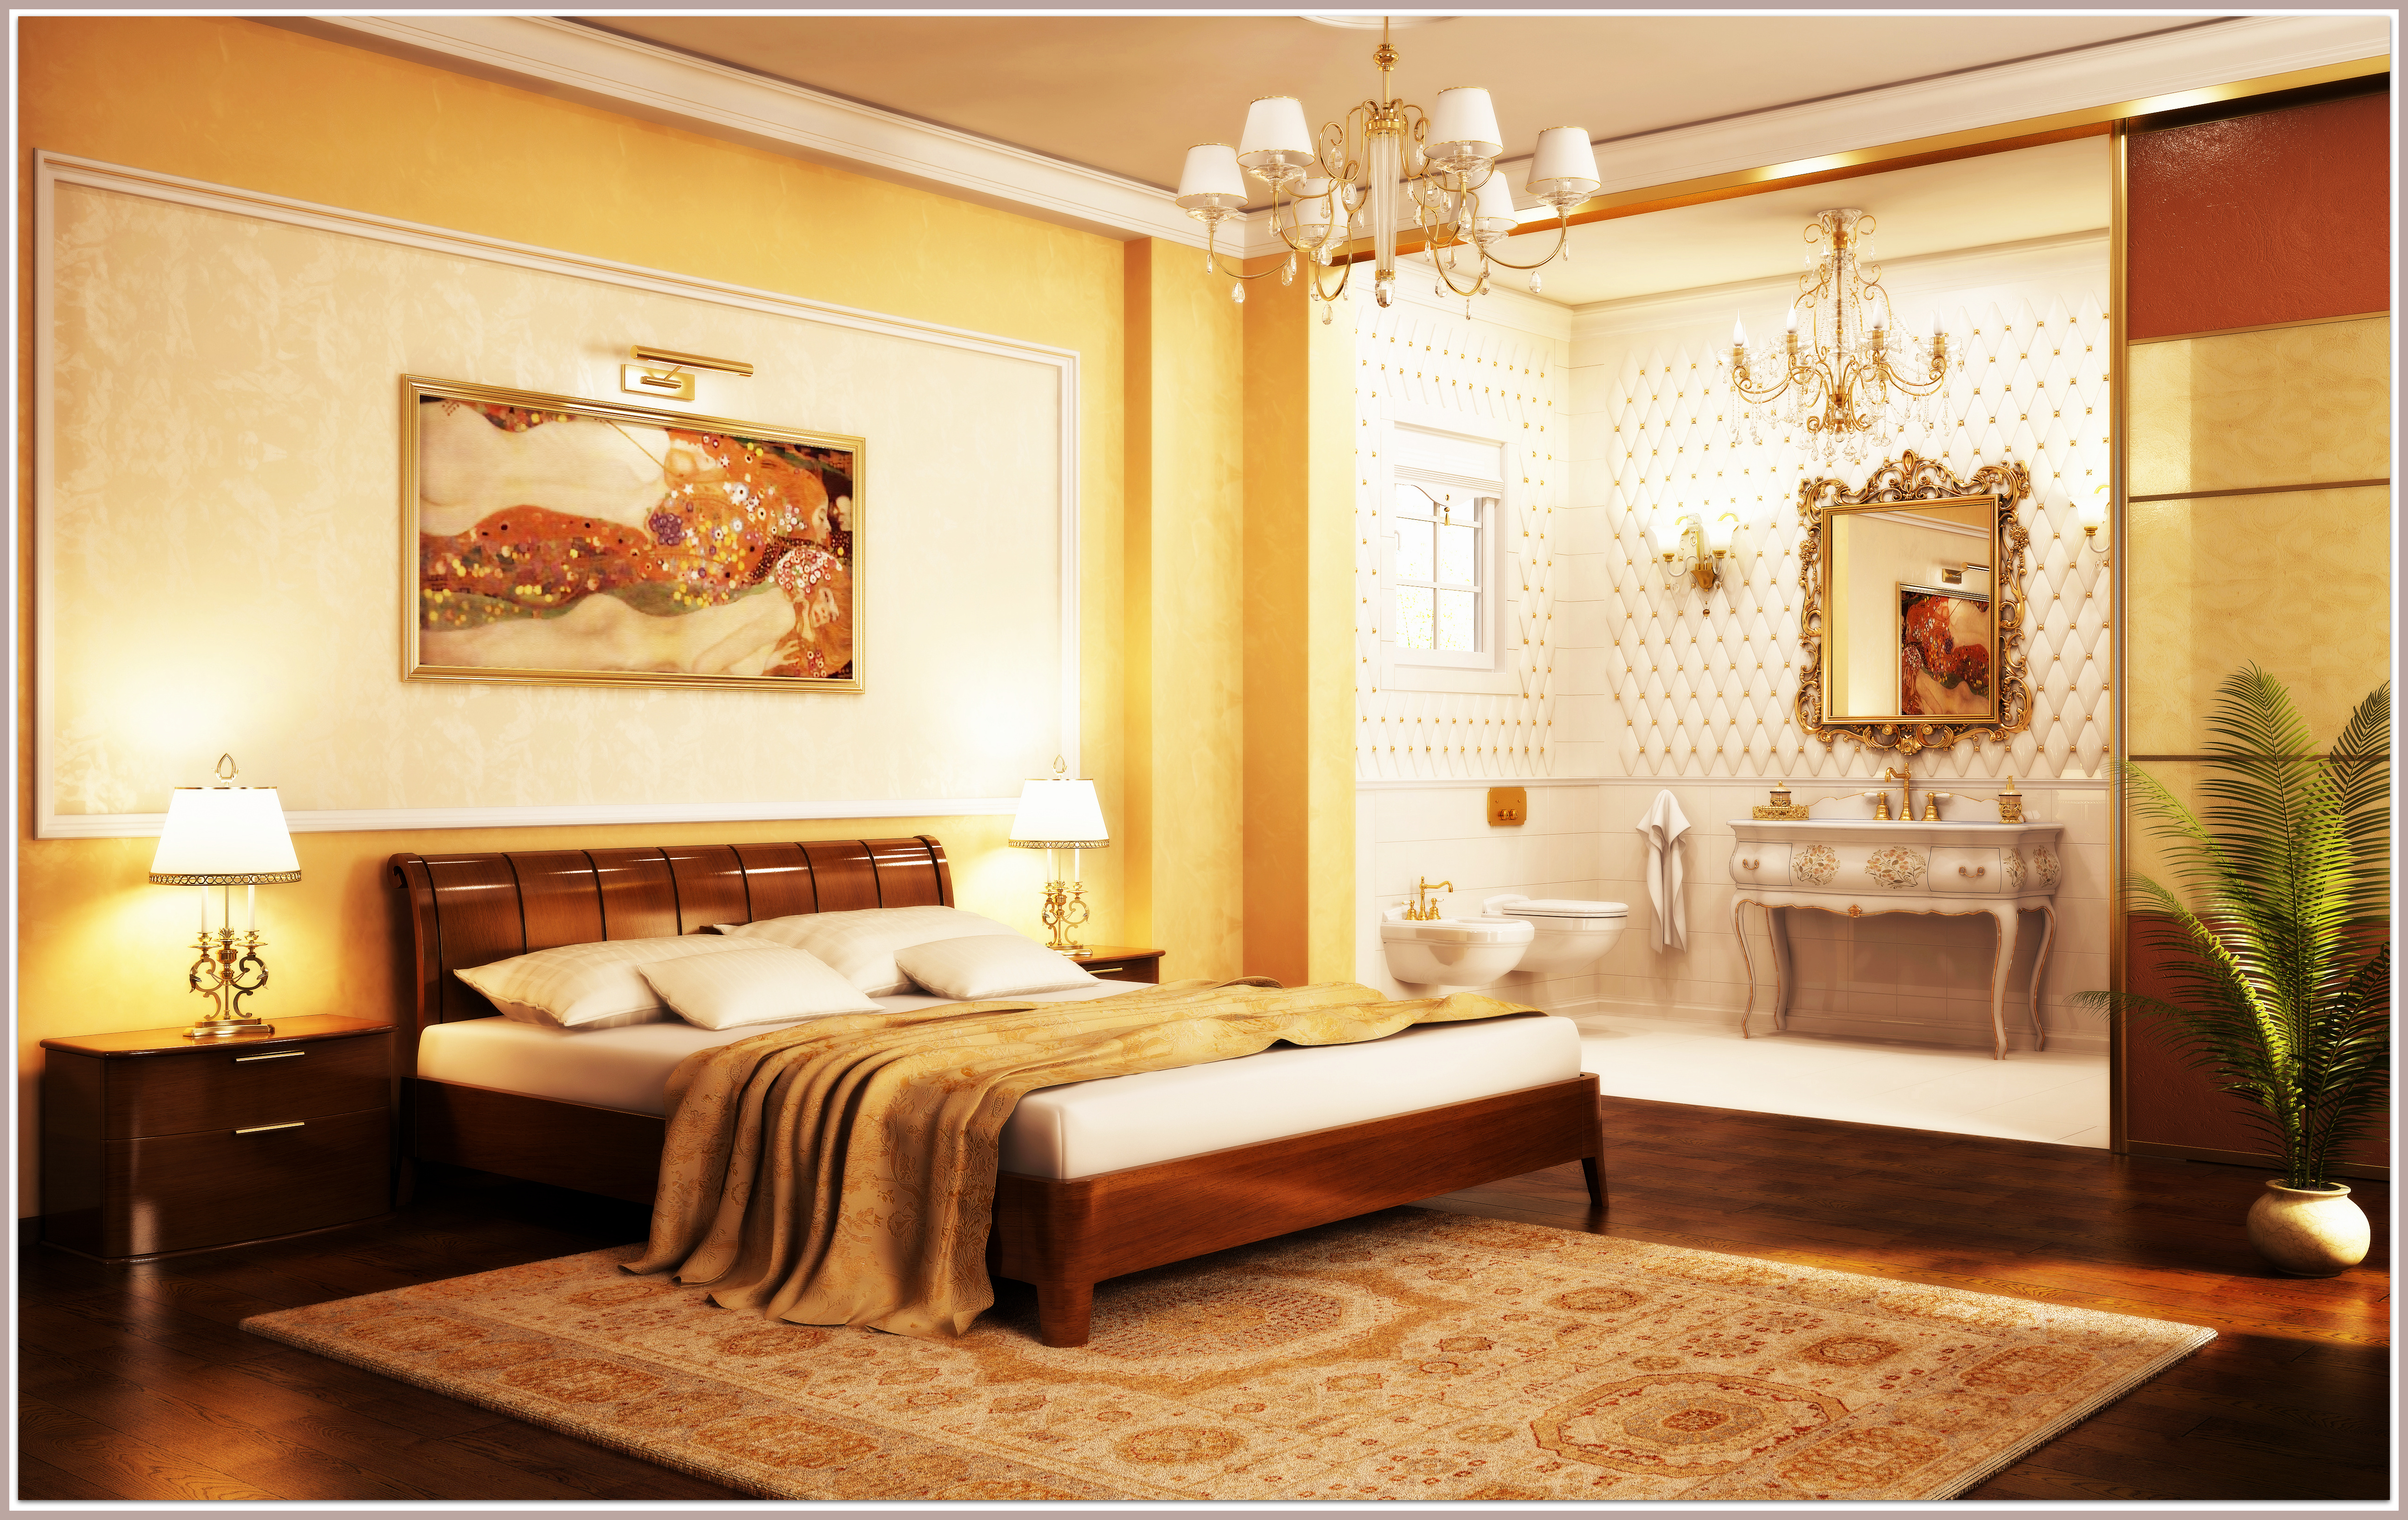 Bedroom with bathroom in a classic style